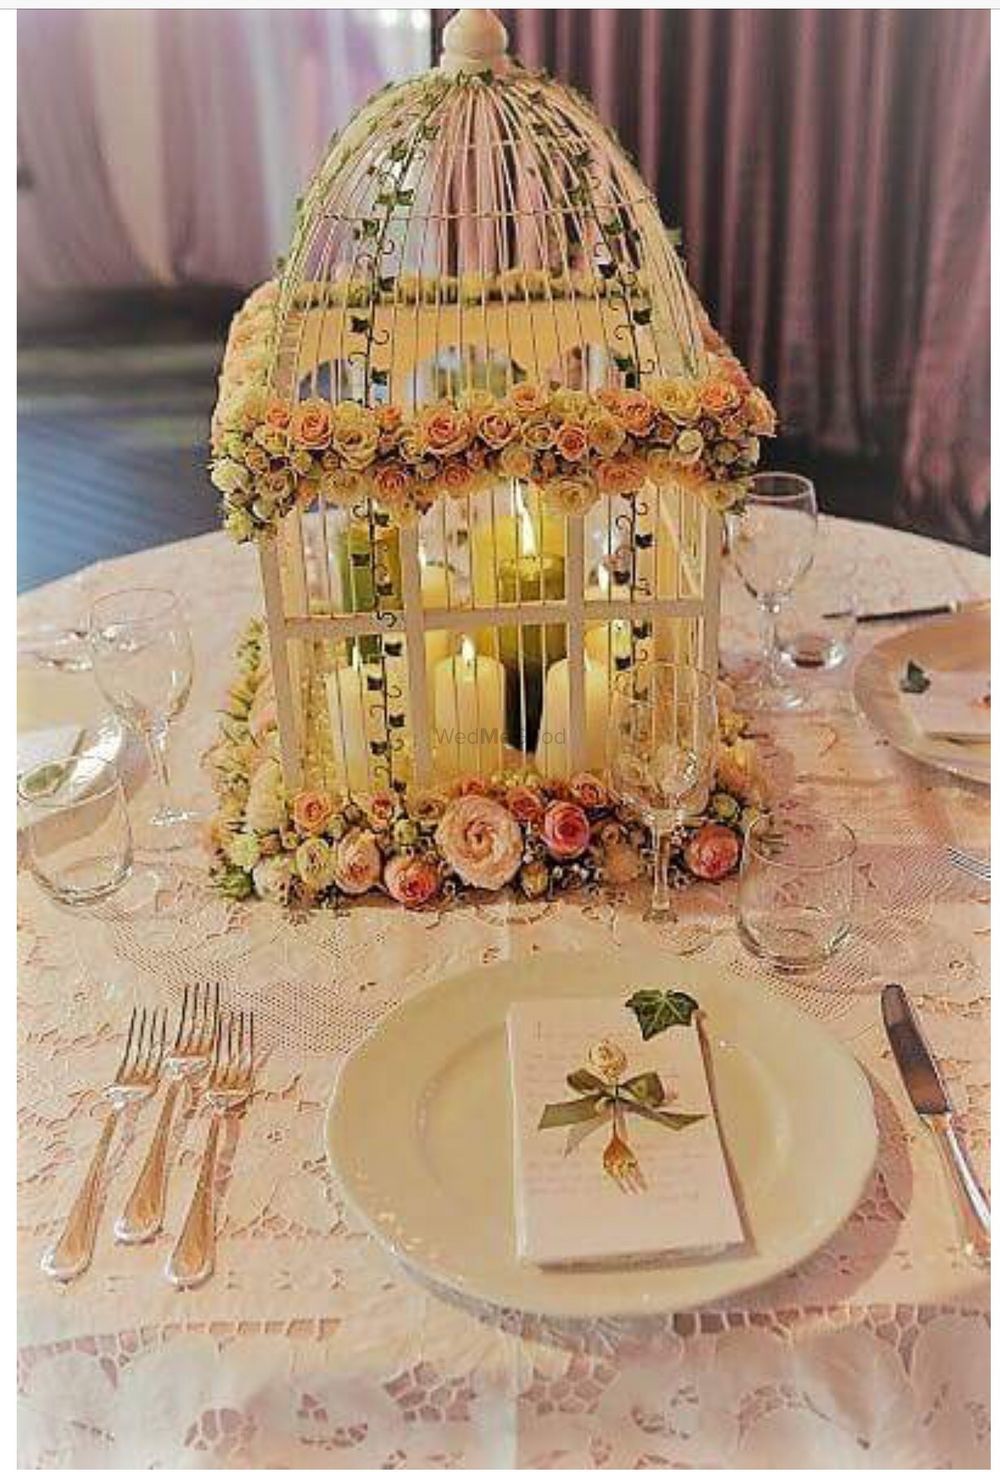 Photo of Gorgeous floral birdcage with lit candle as table centerpiece